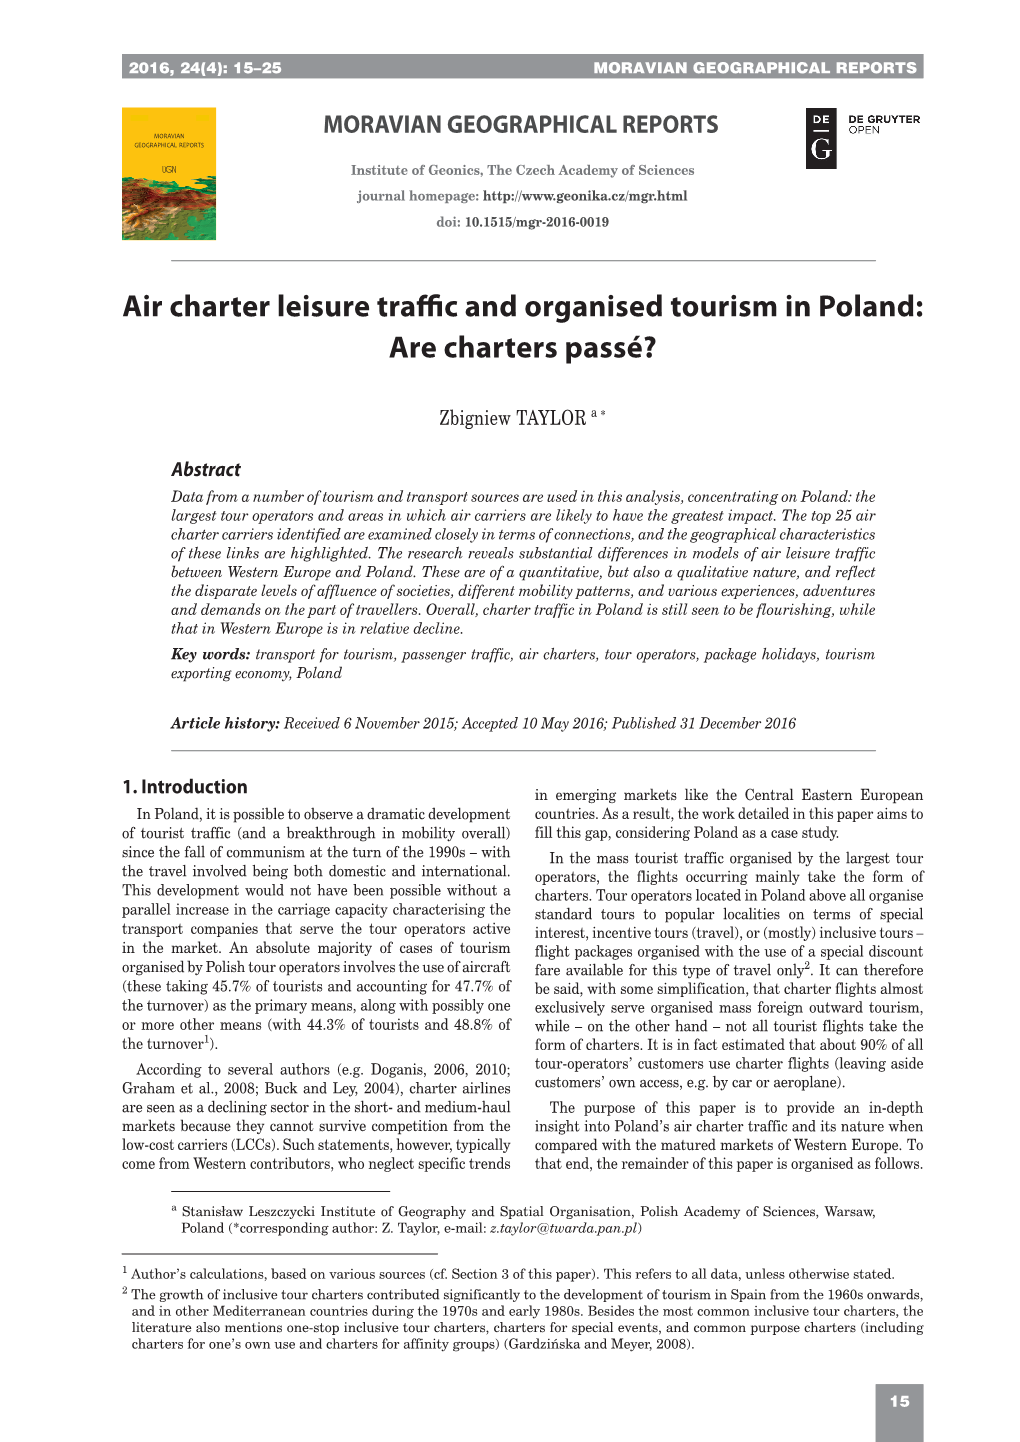 Air Charter Leisure Traffic and Organised Tourism in Poland: Are Charters Passé?